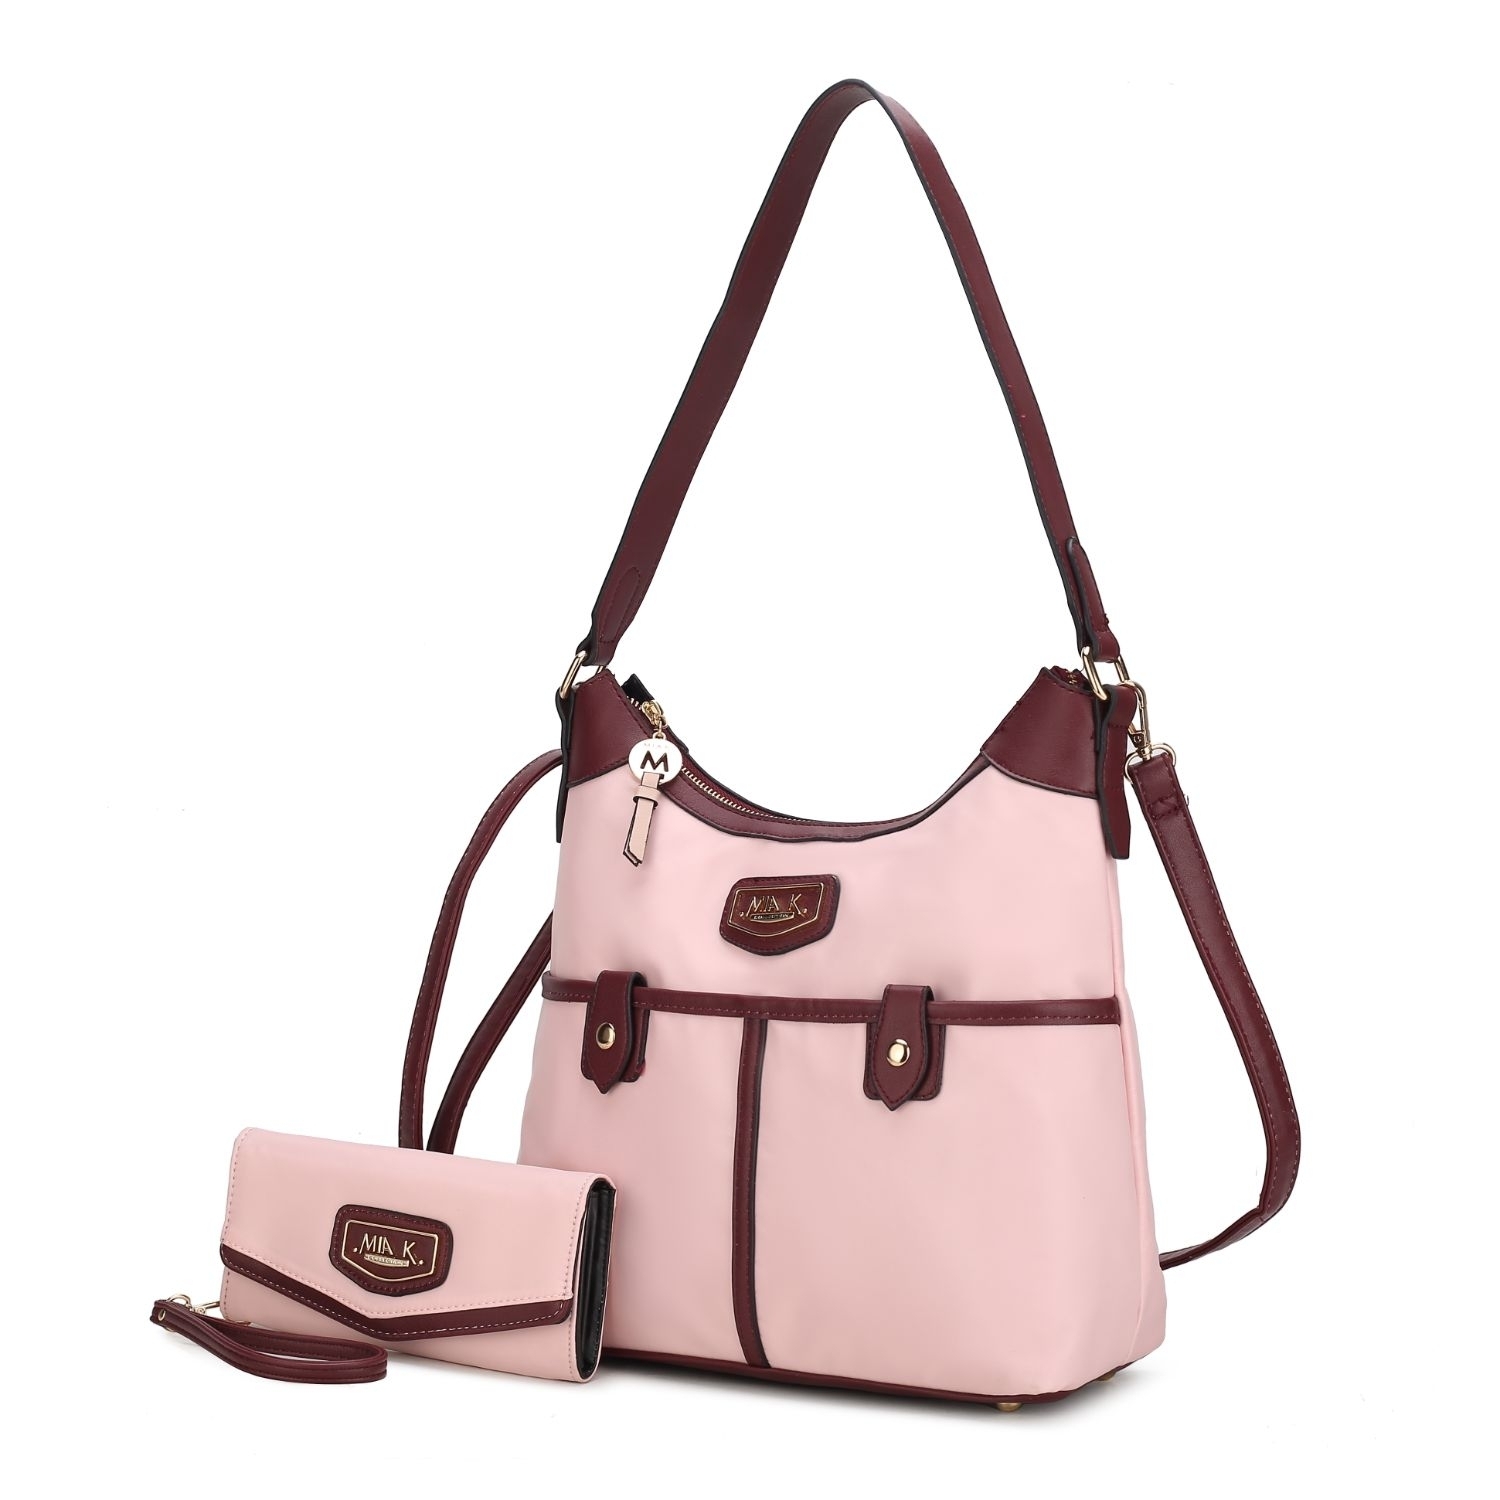 MKF Collection Harper Nylon Hobo Shoulder Handbag With Matching Wallet By Mia K- 2 Pieces - Blush